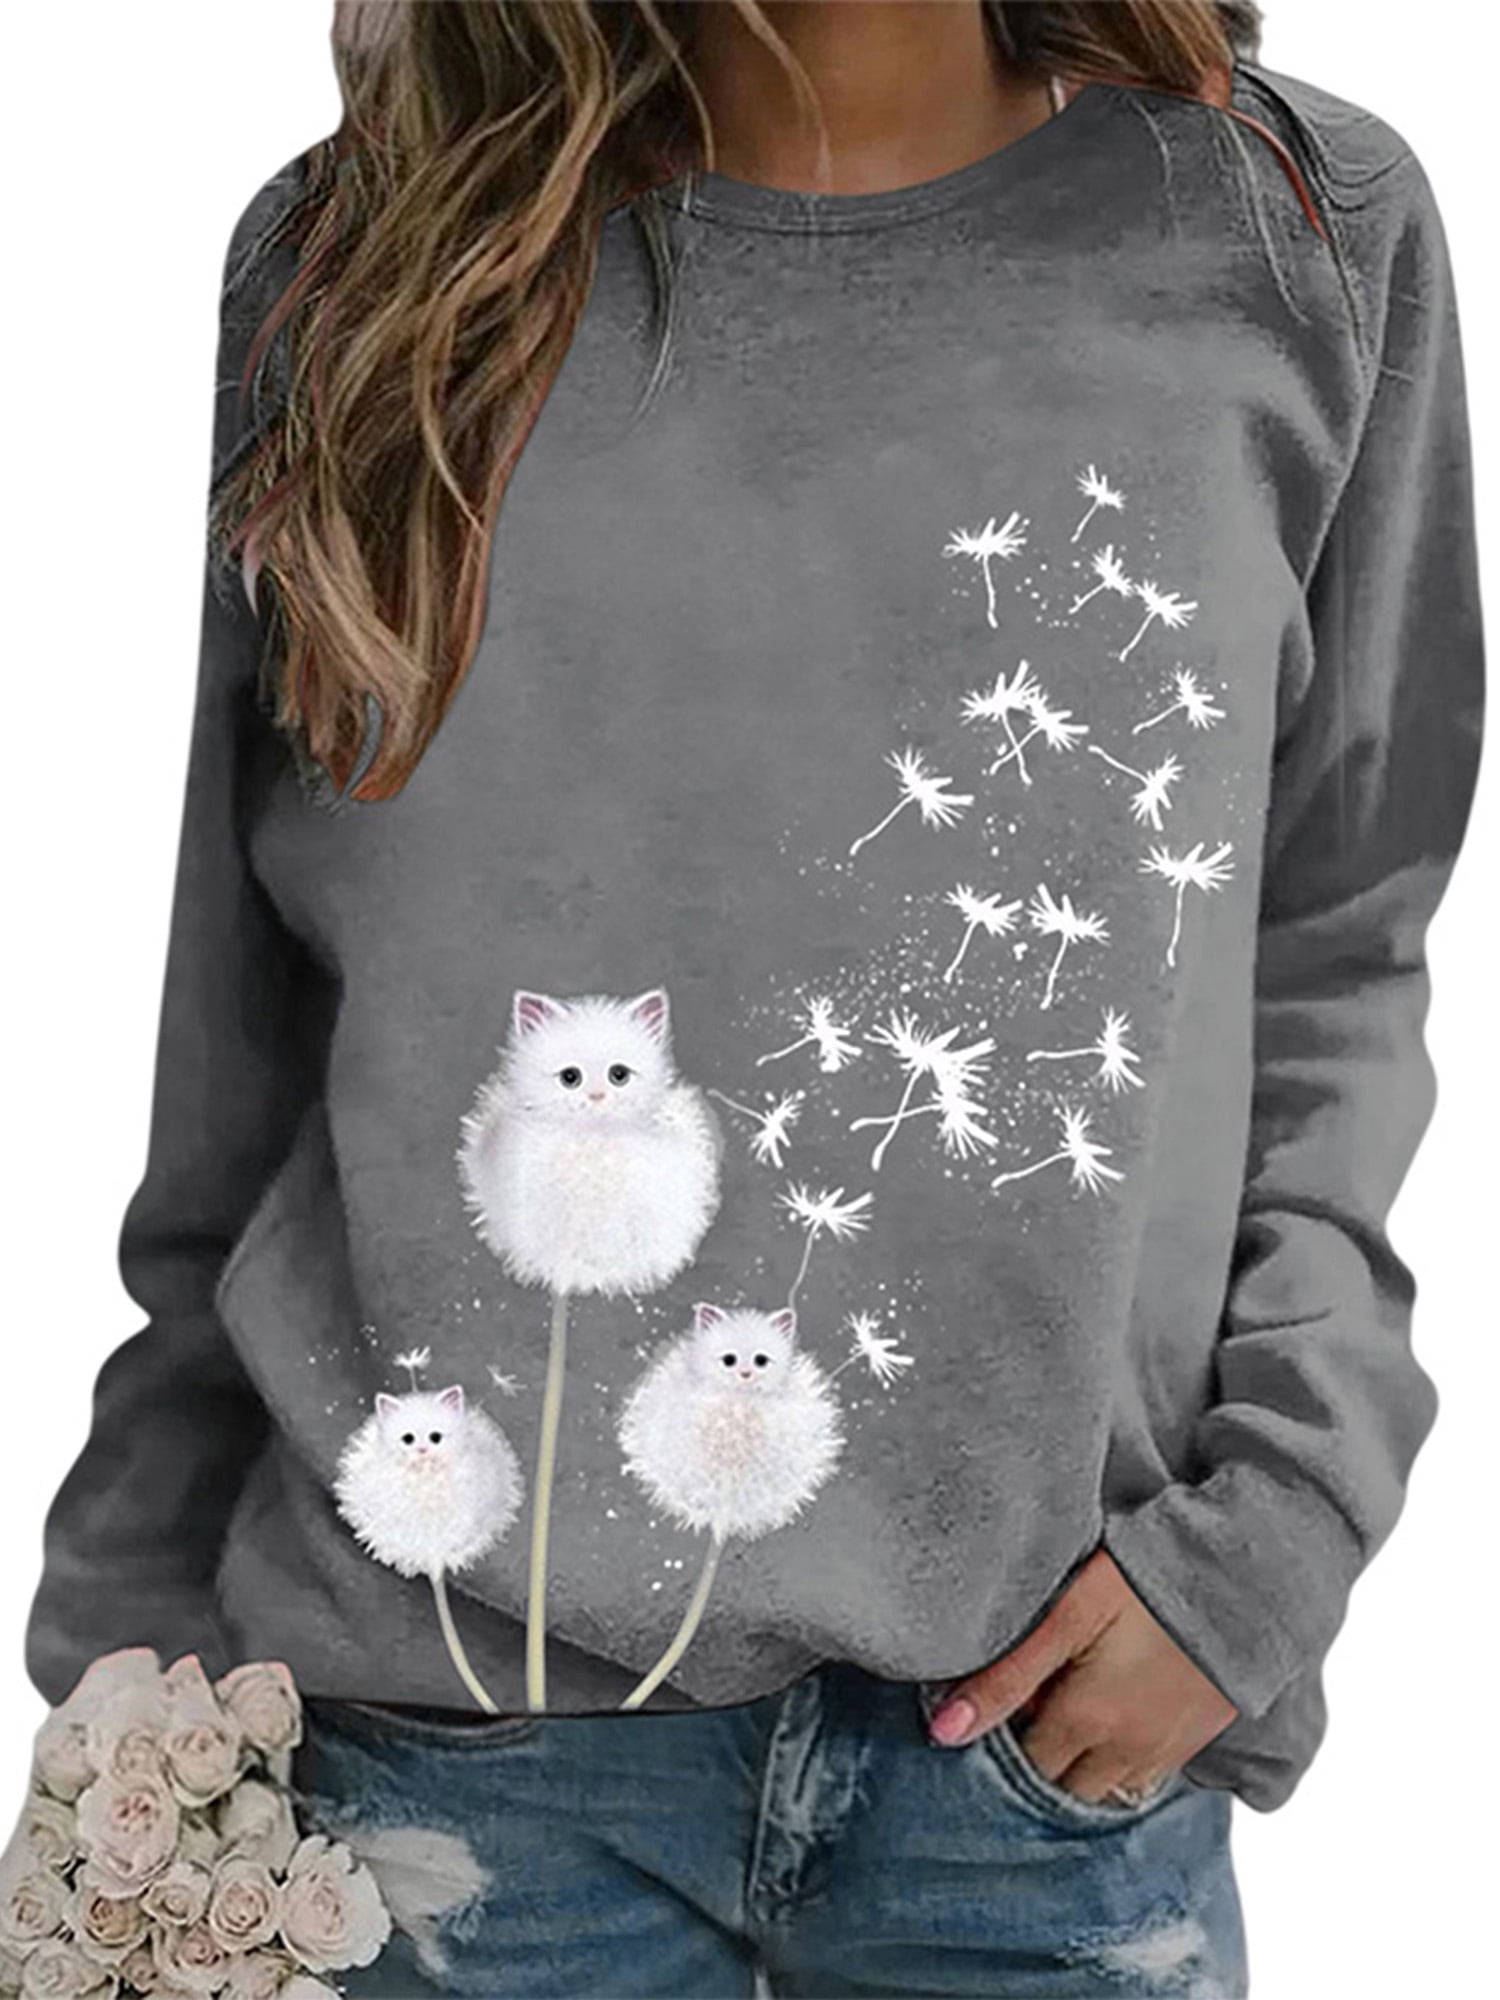 Women's Fashion Pullover Casual T-Shirts Blouse Print Tops Long Sleeve pretty